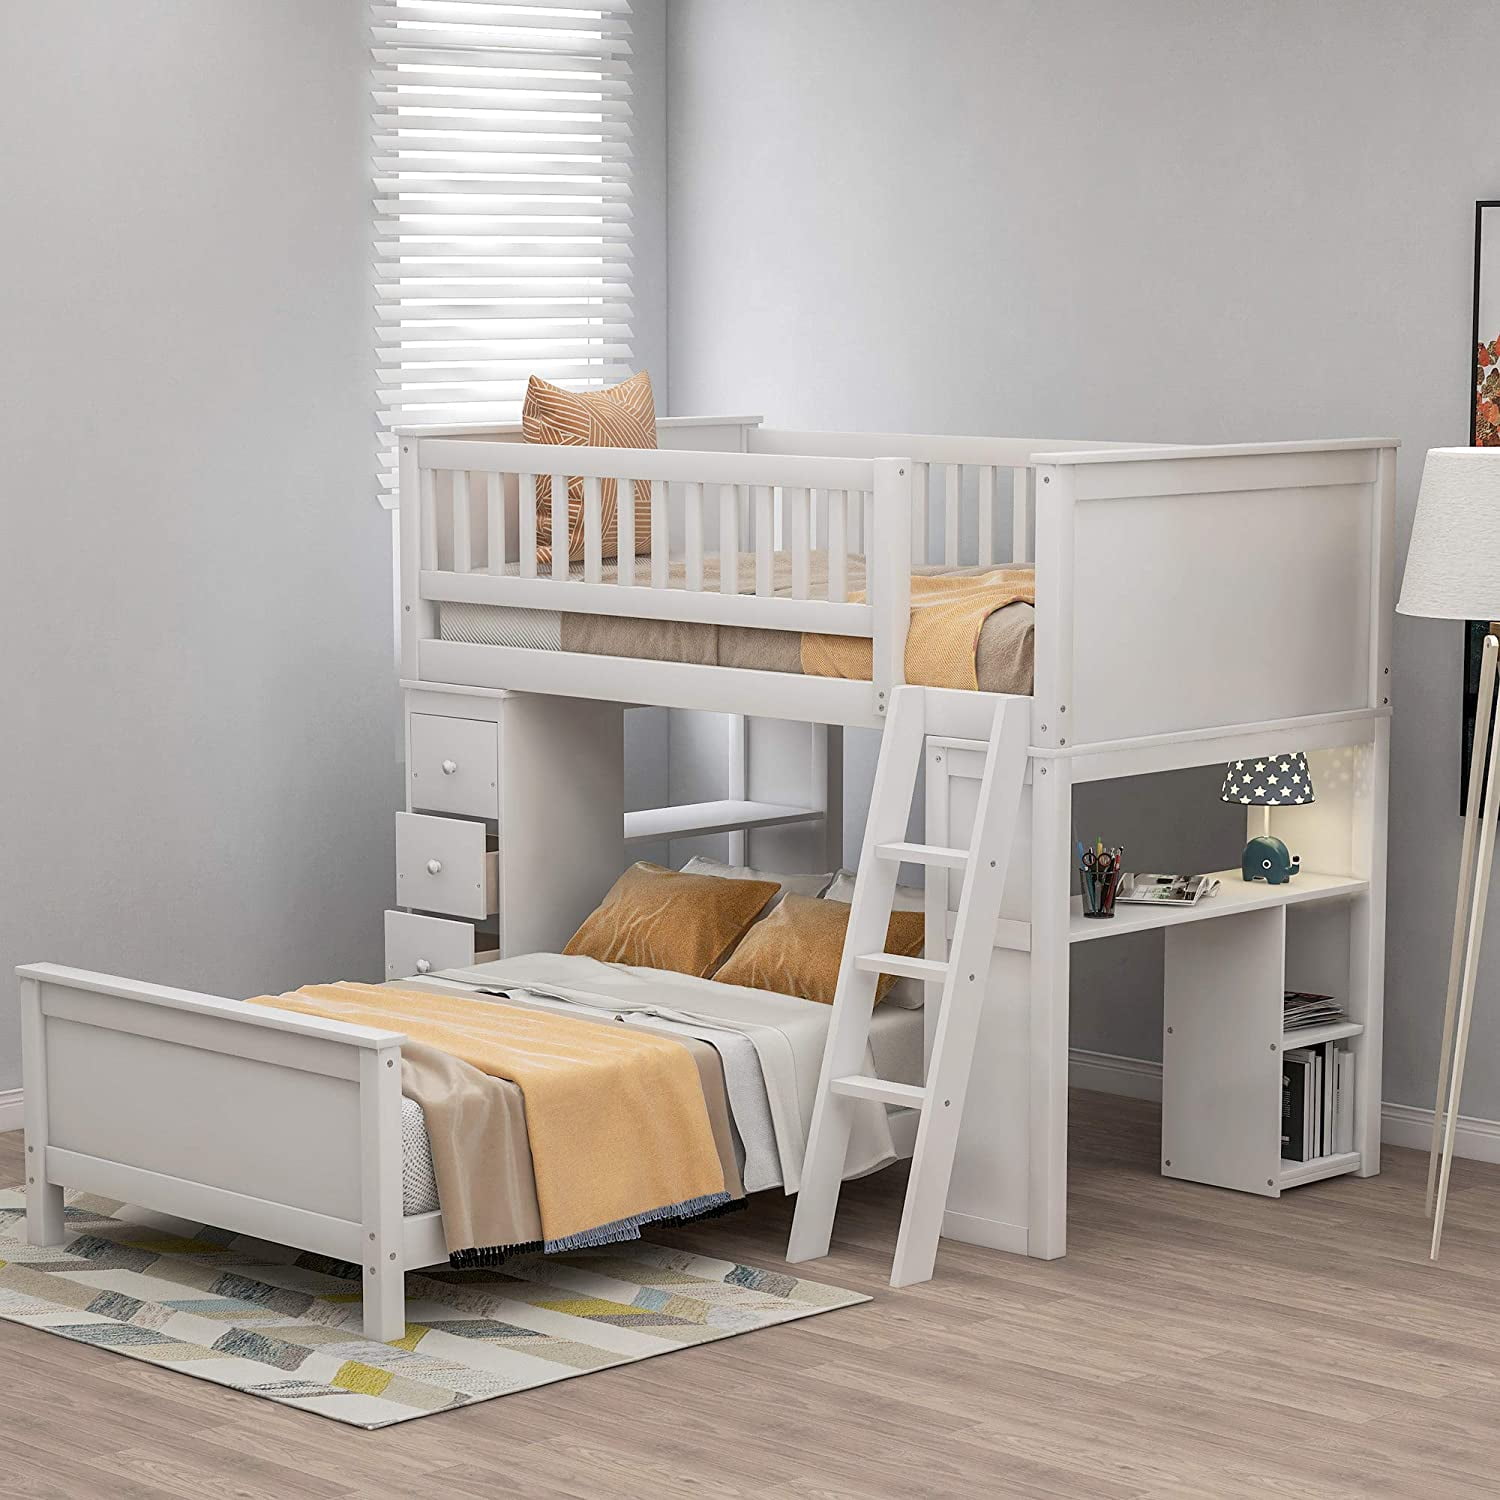 Bunk Bed Twin Over Twin, Twin Loft Bed with 4 Storage Drawers, Desk and Shelves for Kids, Bed